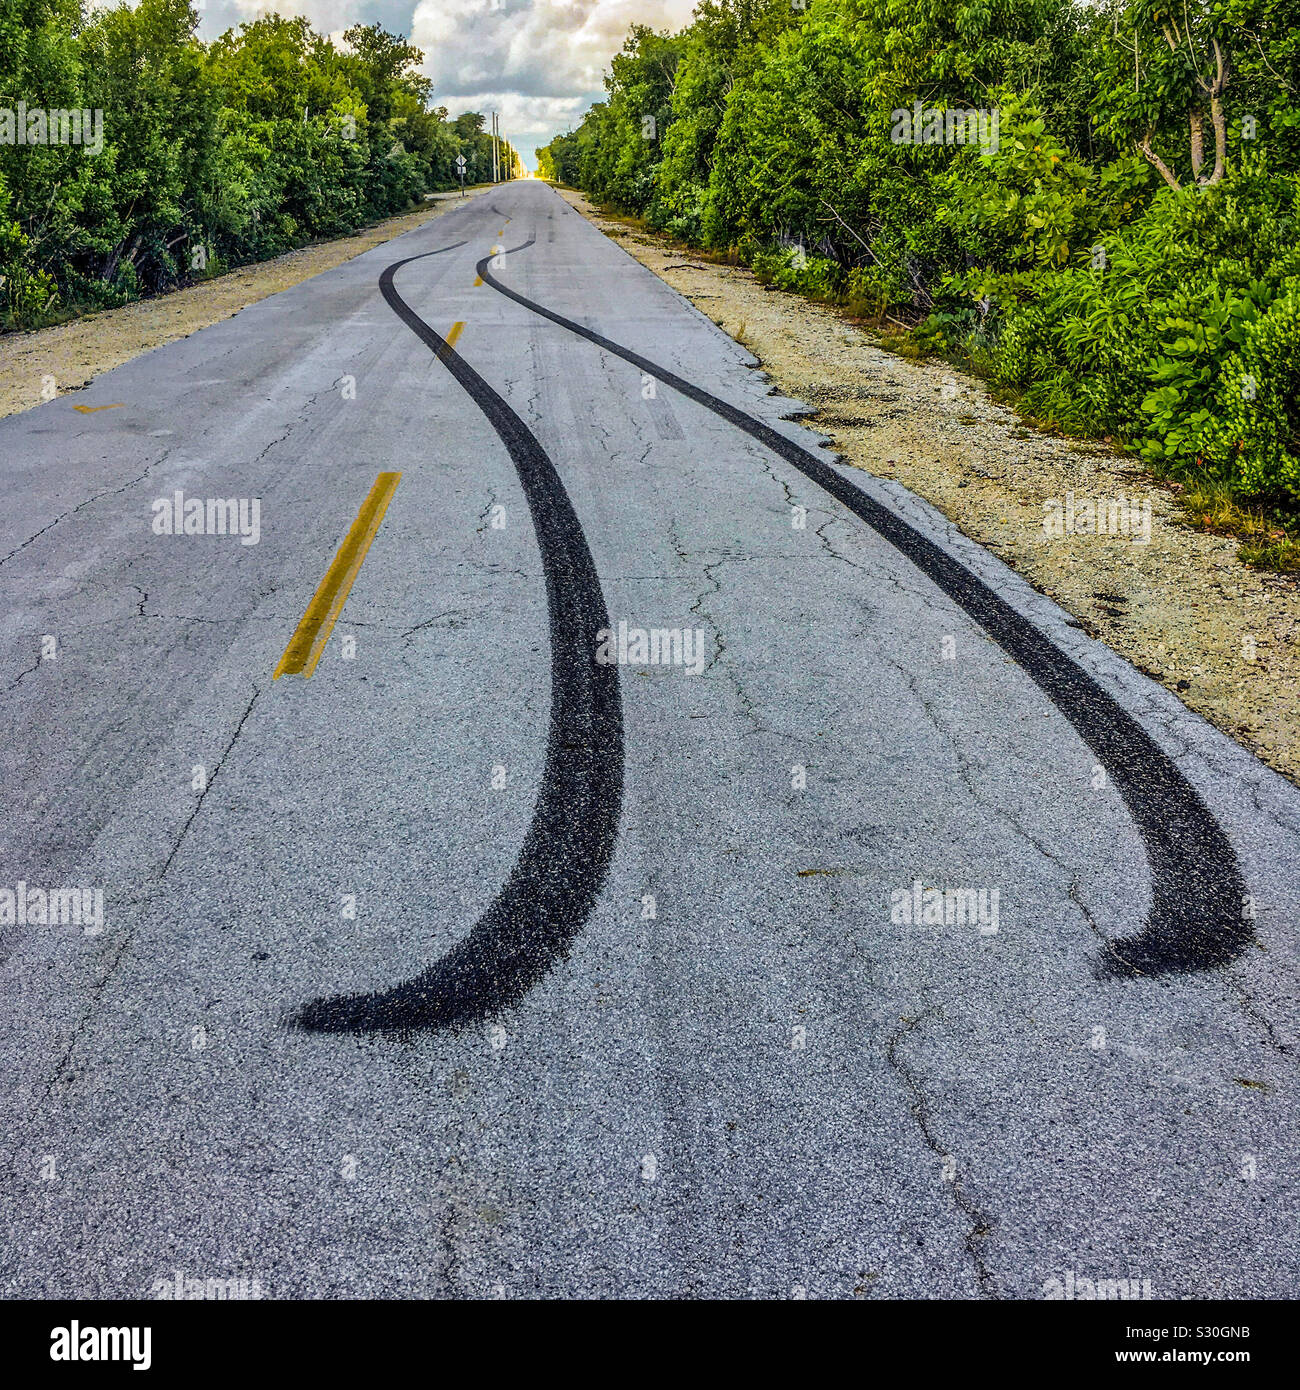 Skid marks Skidmarks at the end of a road, No Name Key, Florida, USA. Stock Photo